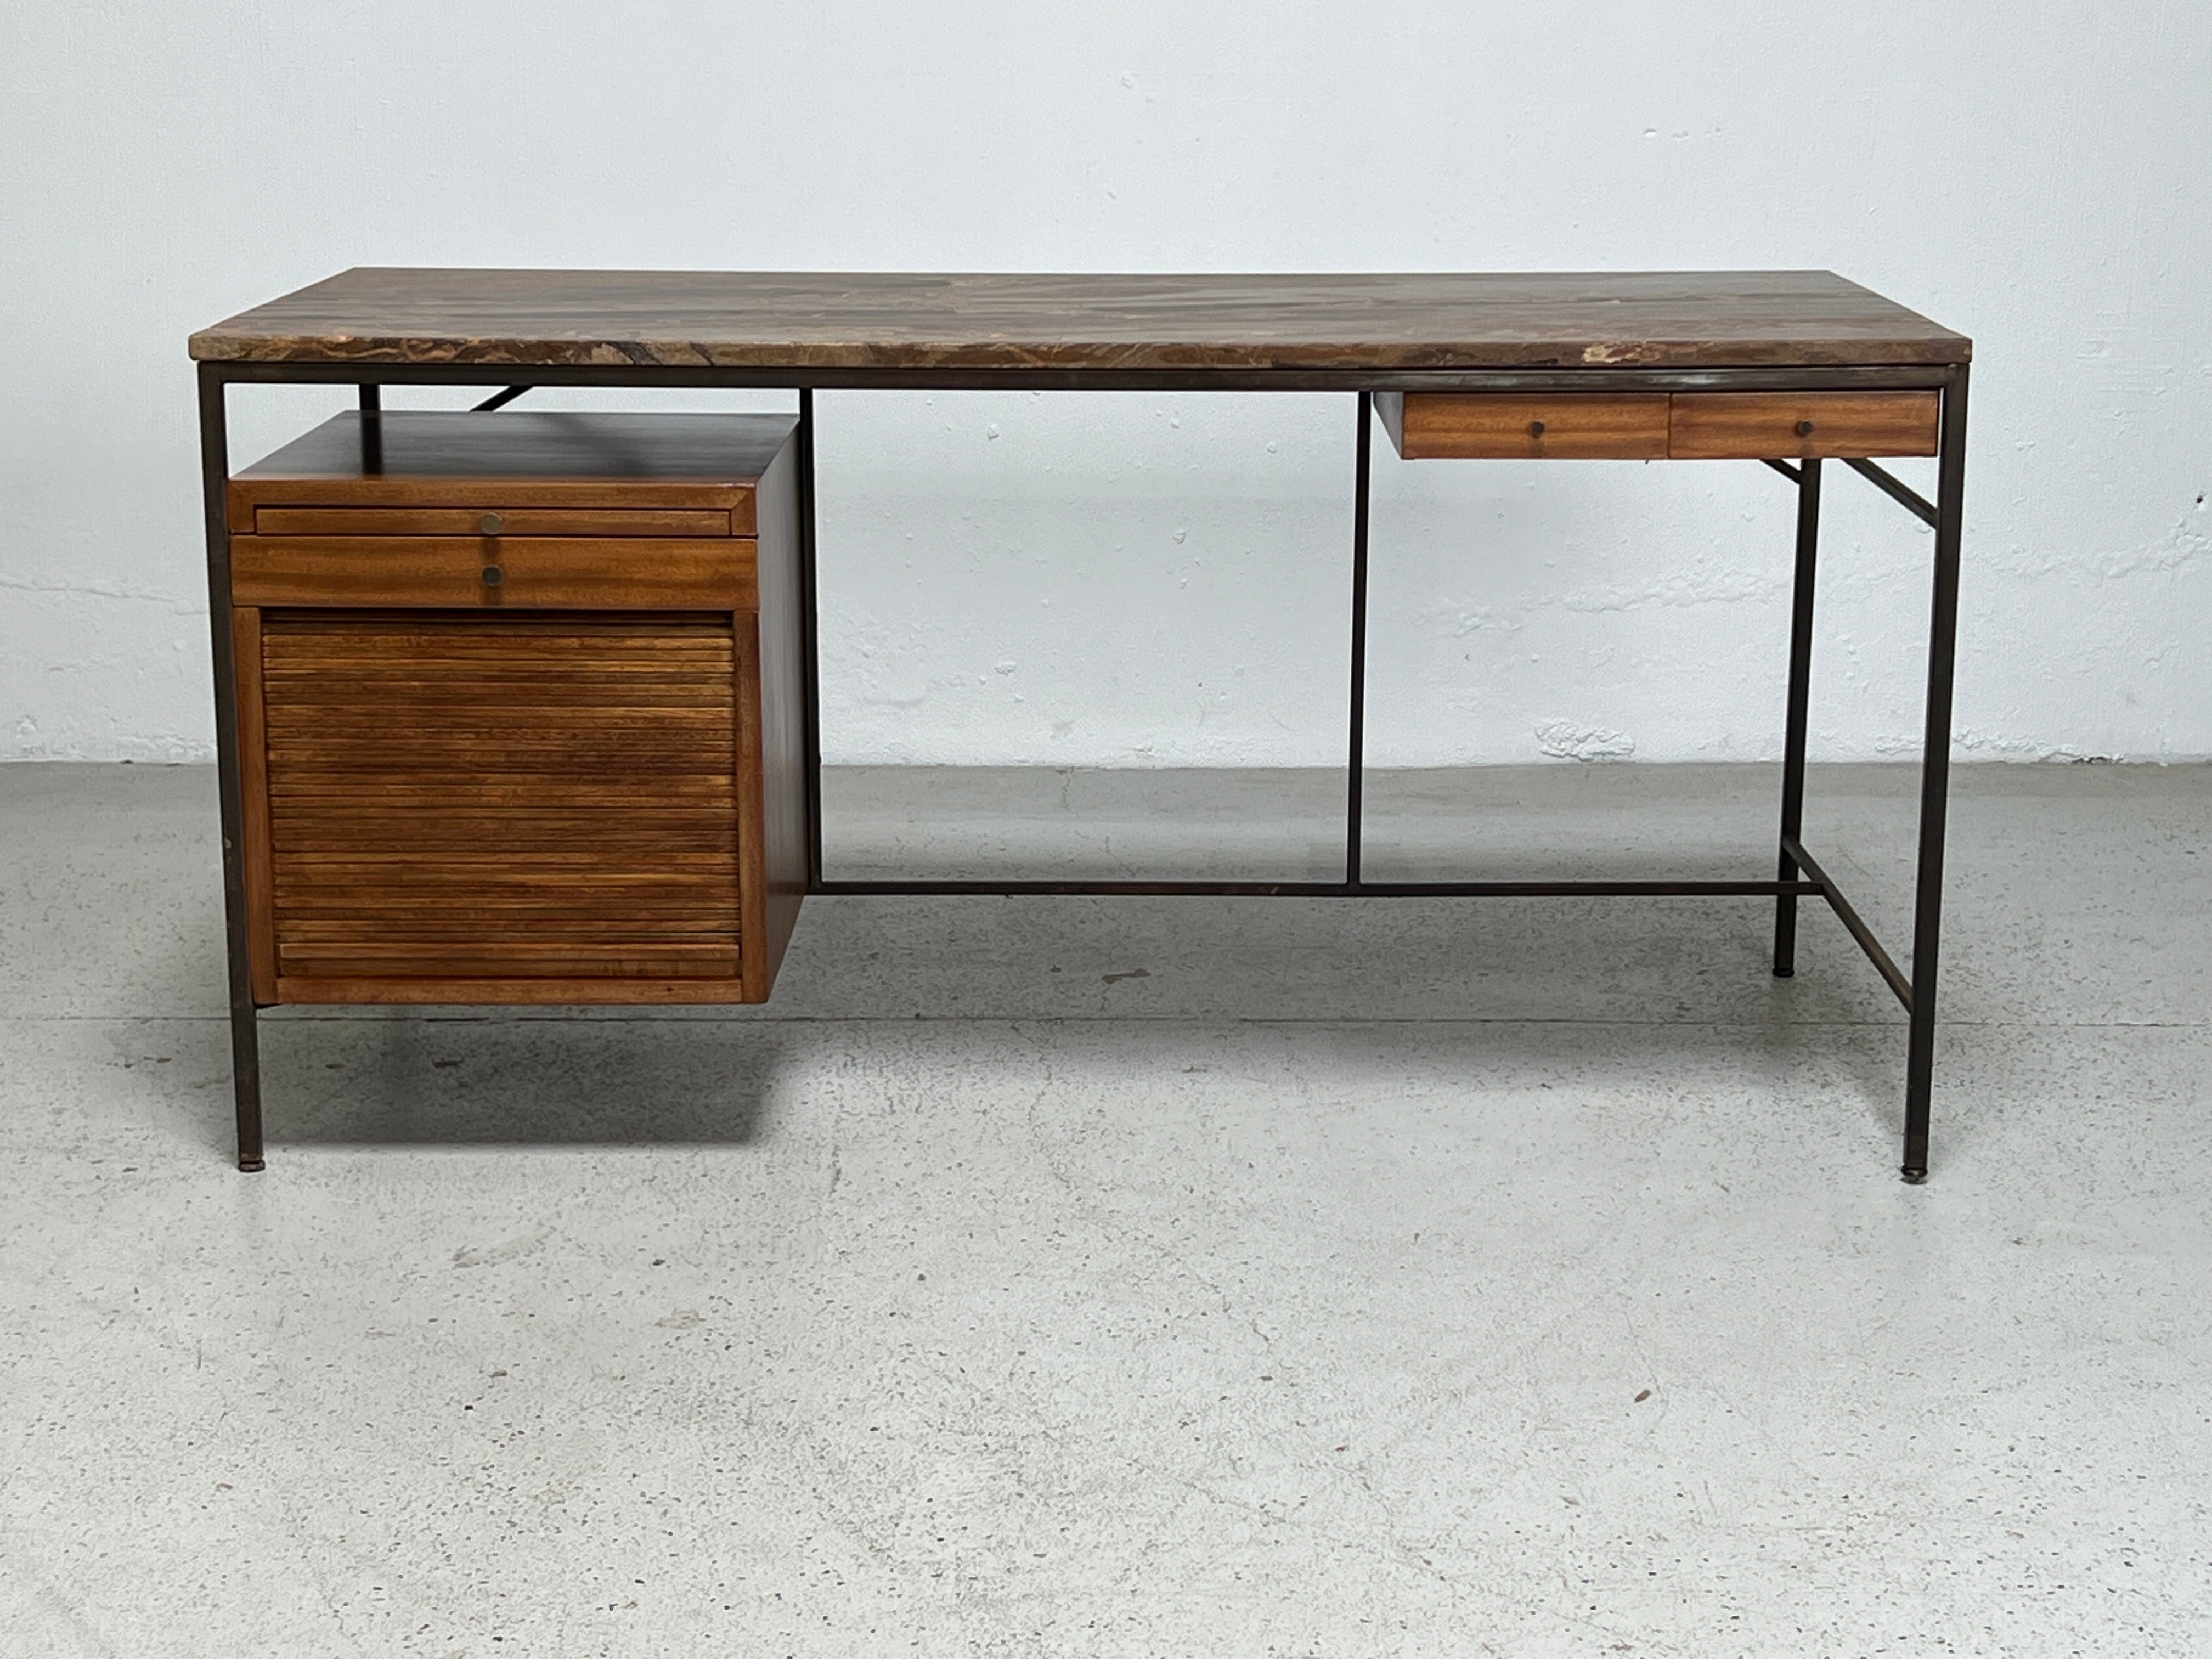 A rare brass and mahogany desk with stone top designed by Paul McCobb for Calvin. 